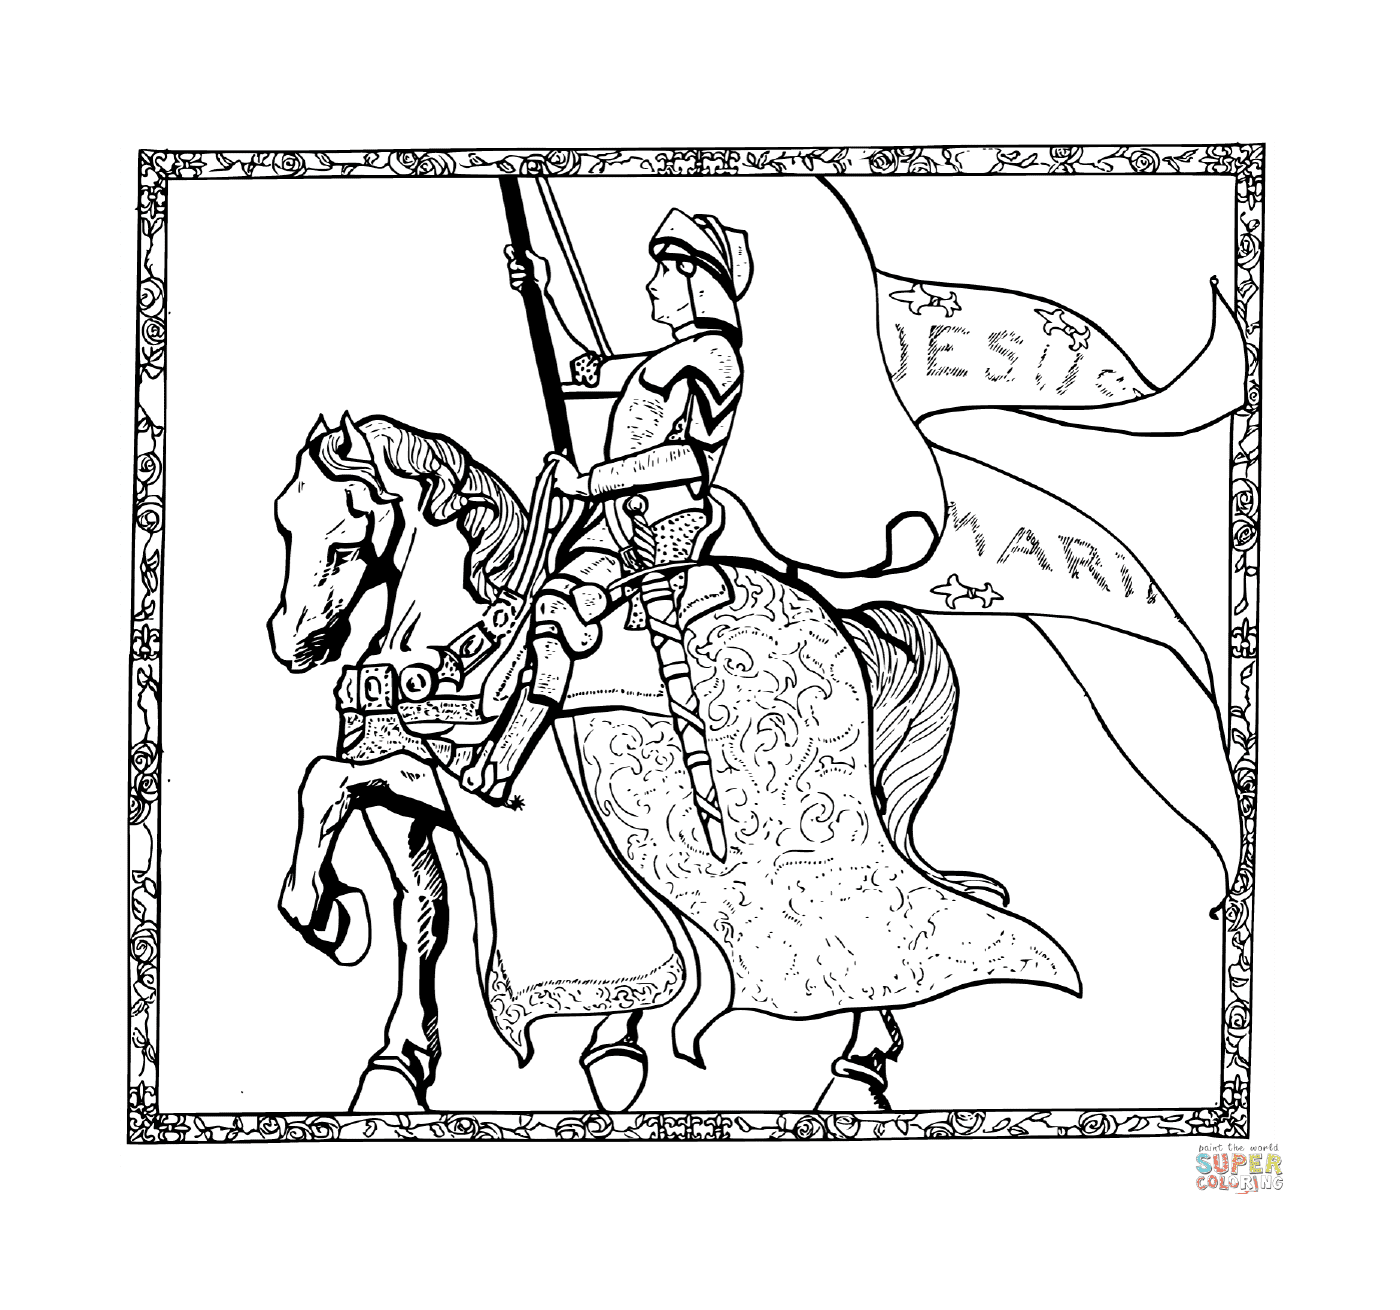  Joan of Arc riding a horse 